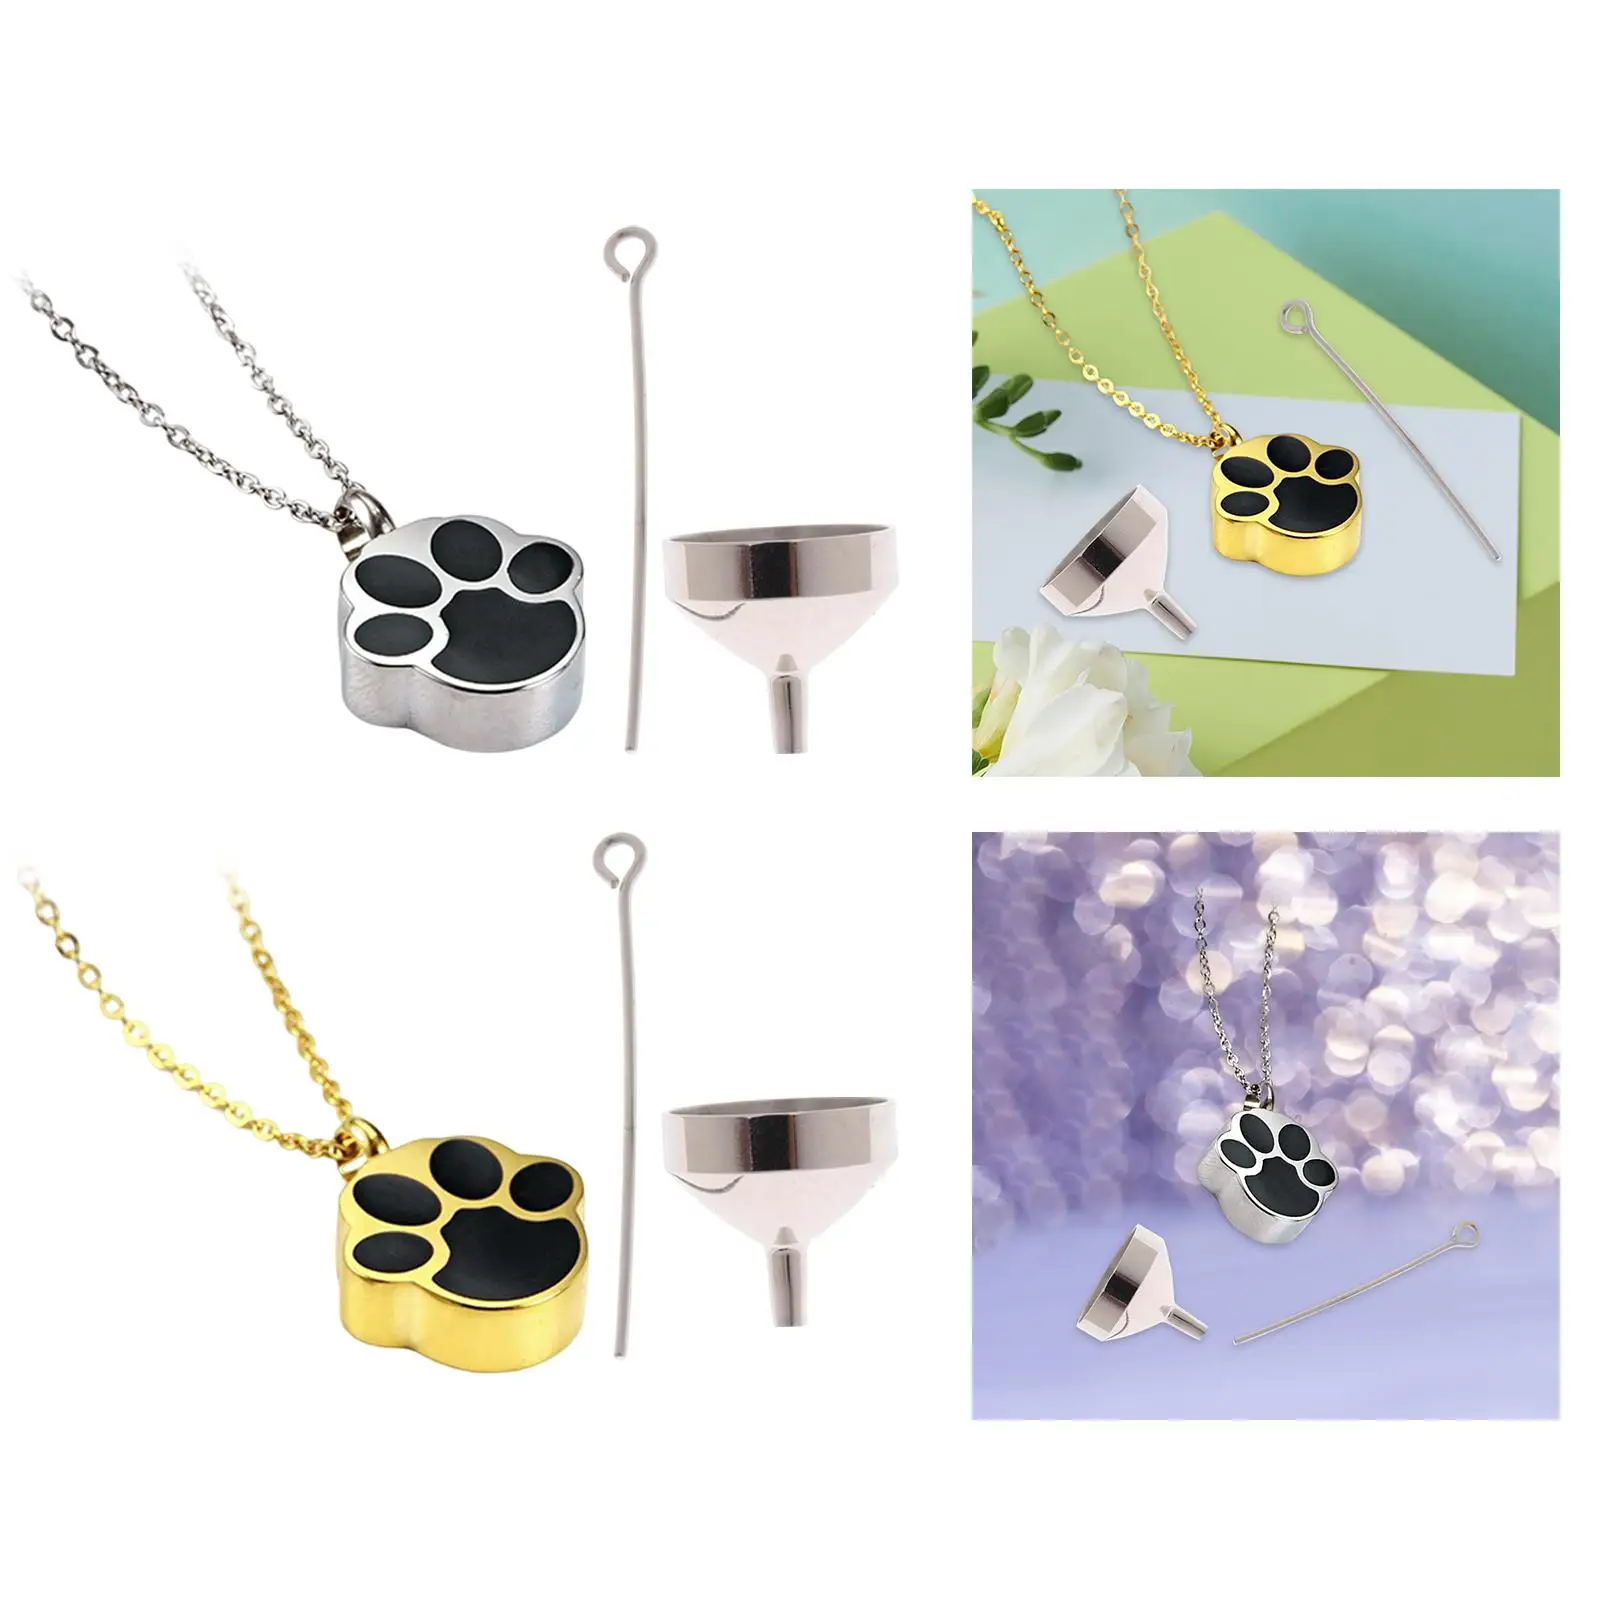 Stainless Steel Cremation Jewelry with Funnel Waterproof Gift Cute Charms Fashion Memorial Locket Pendant for Woman Man Friends